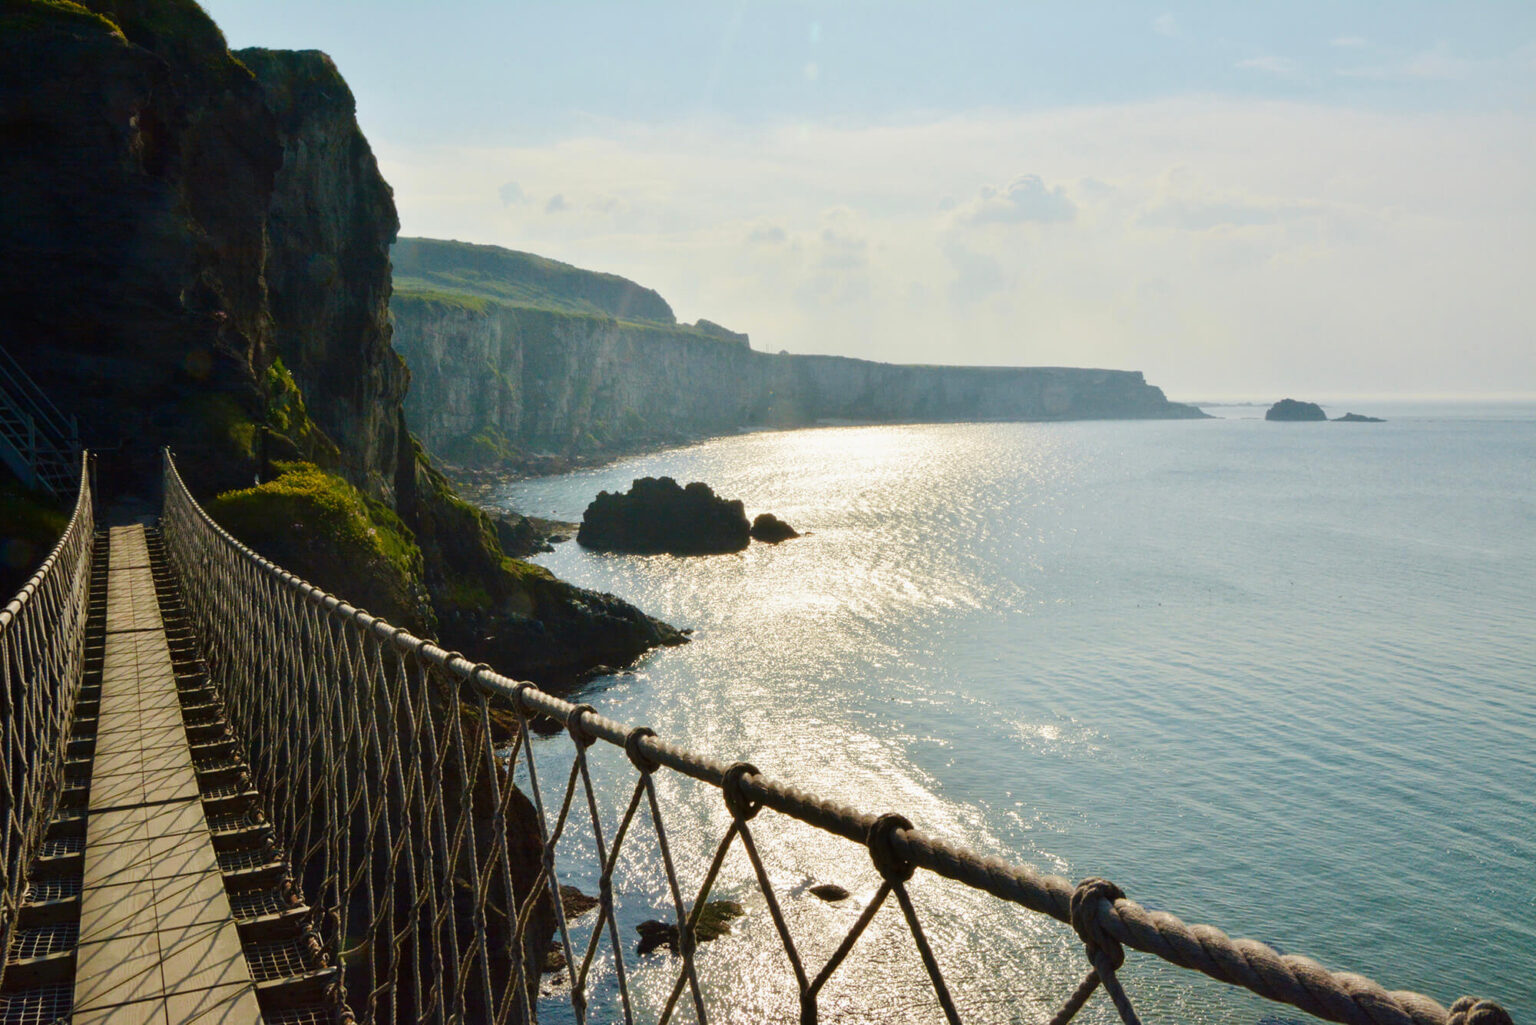 View on a Carrick-a-Rede Rope Bridge